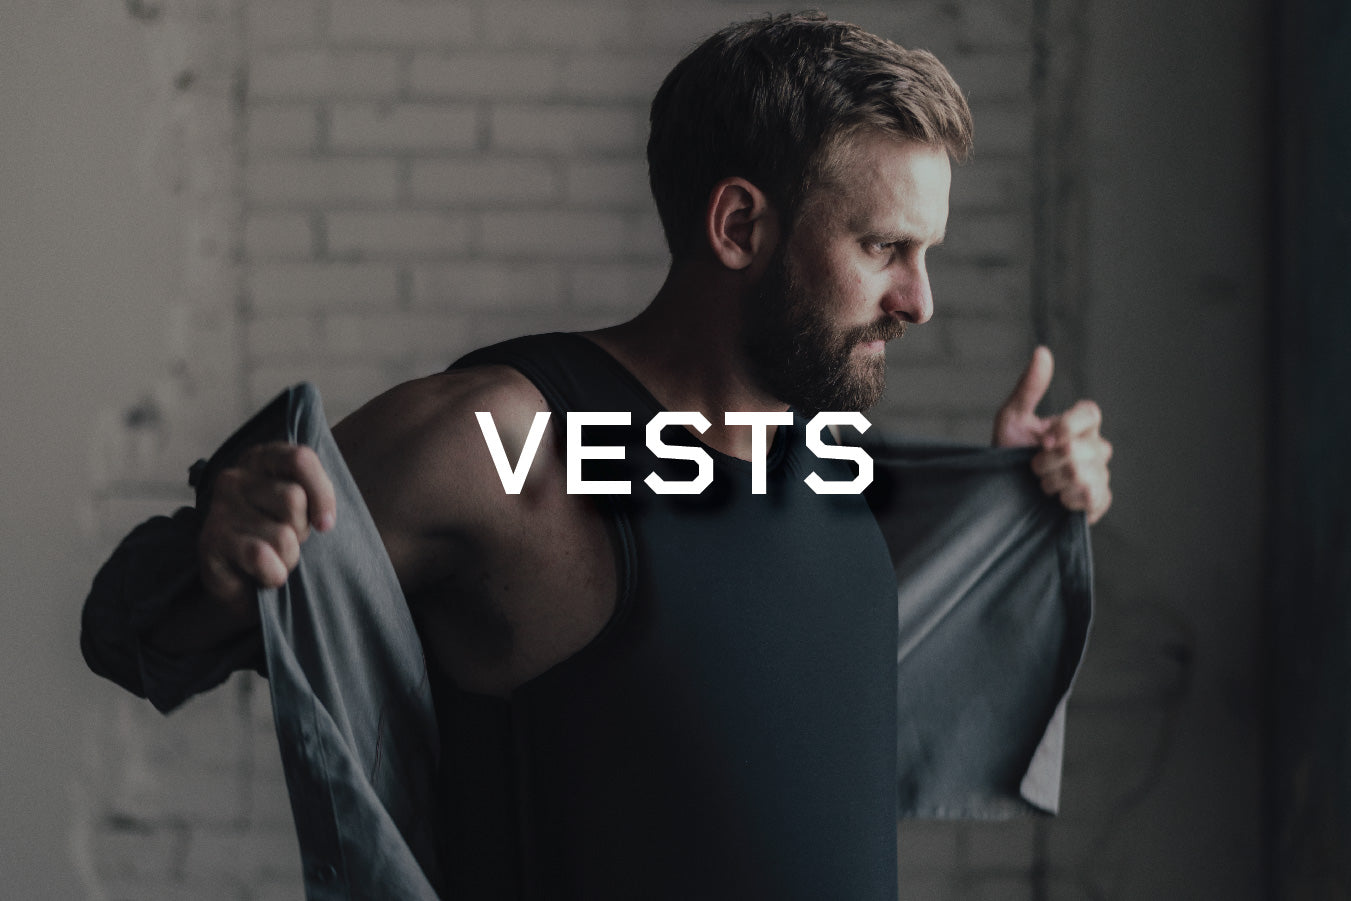 bulletproof vests, concealable and tactical. Lightweight and discreet body armor